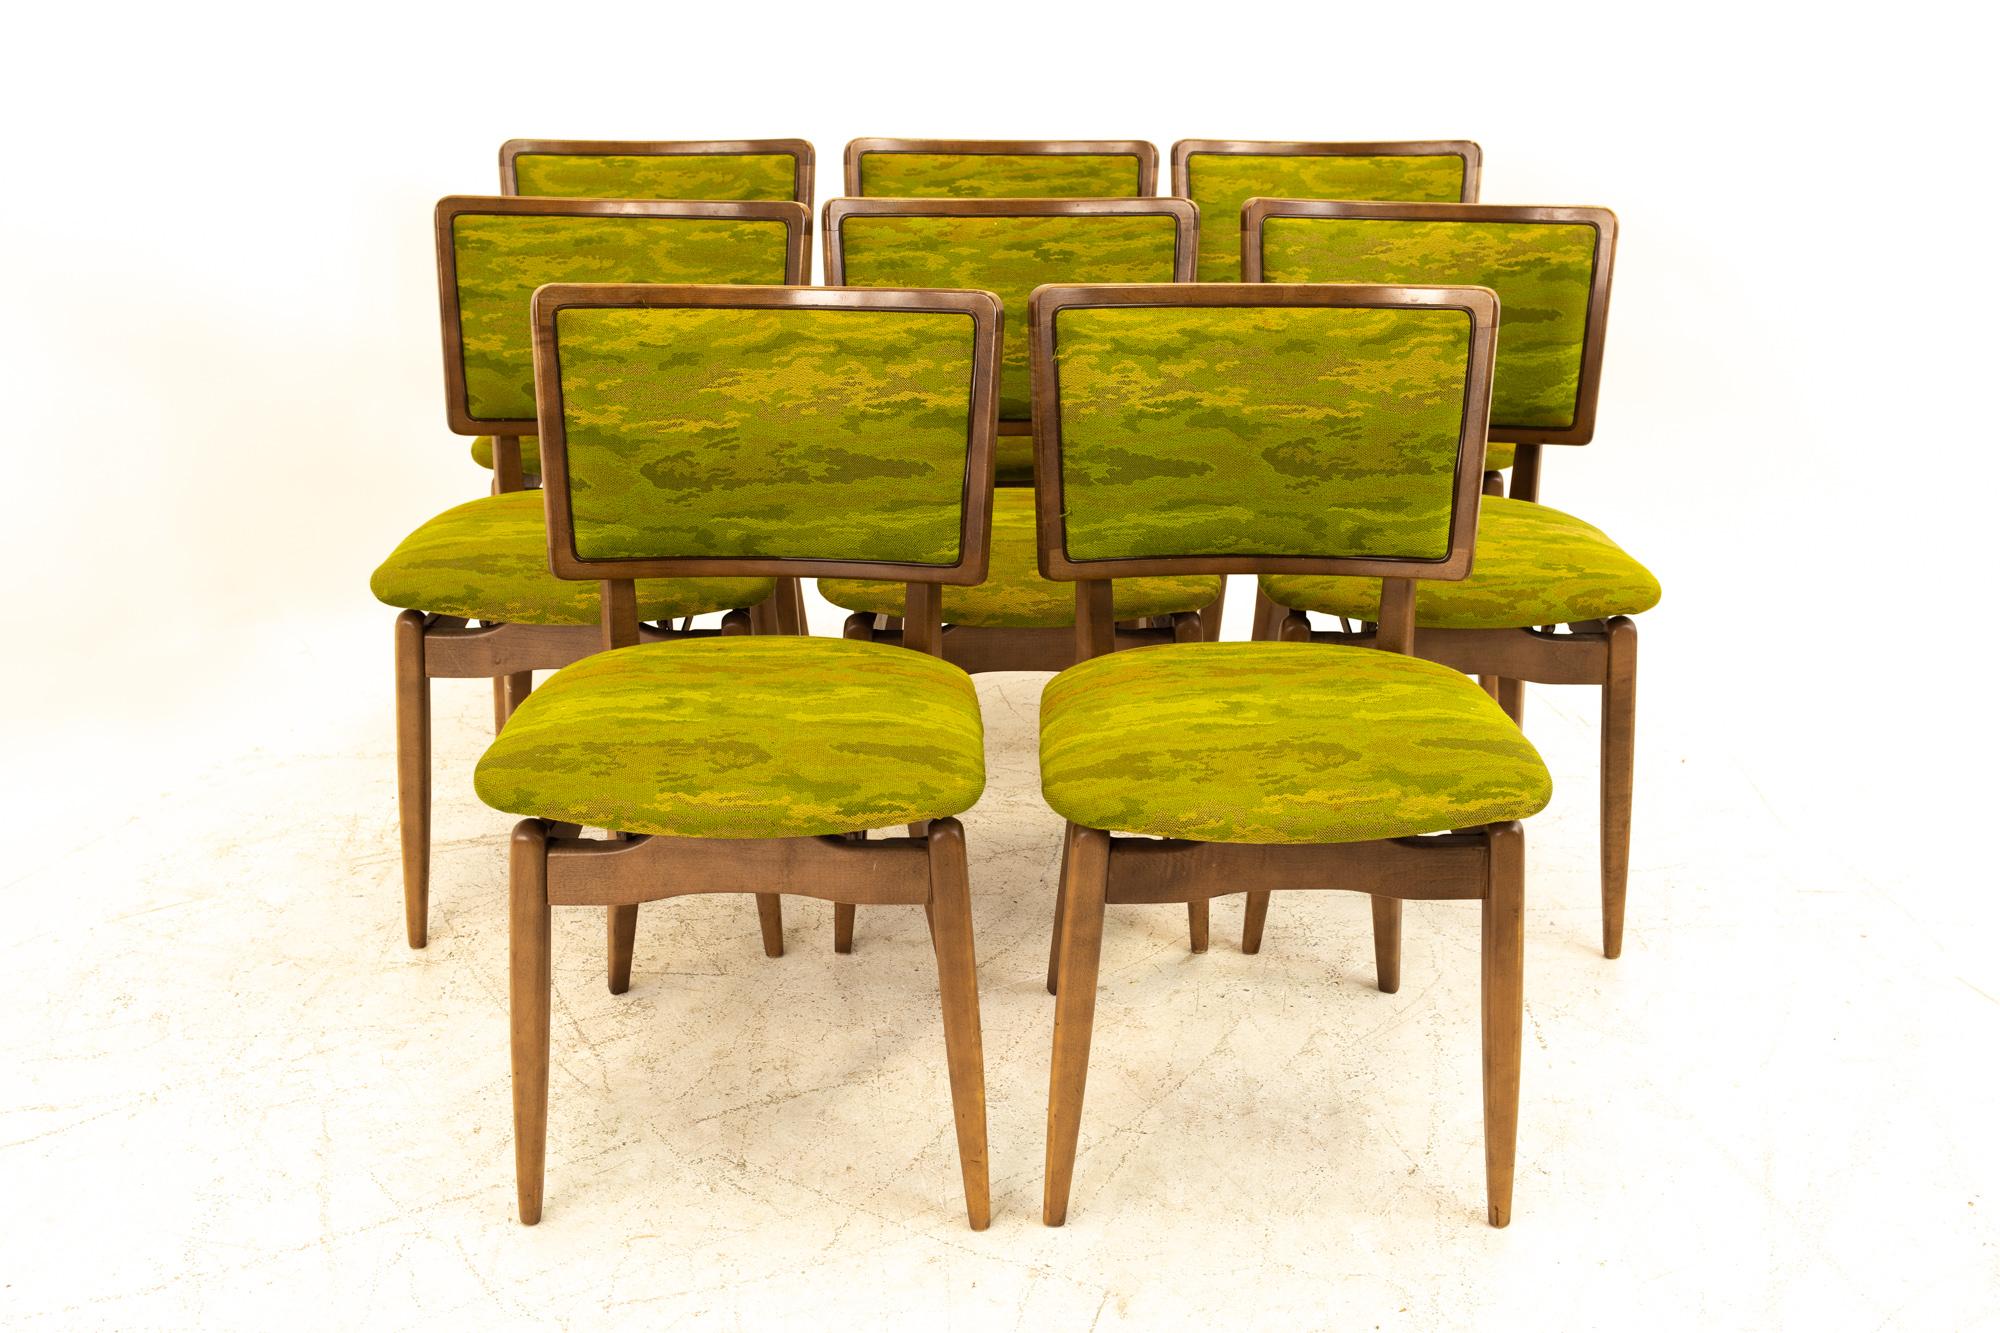 Stakmore Mid Century Folding Dining Chairs - Set of 8 
Each chair measures: 17.5 wide x 18.25 deep x 31, with a seat height of 18.5 inches

All pieces of furniture can be had in what we call Restored Vintage Condition. That means the piece is